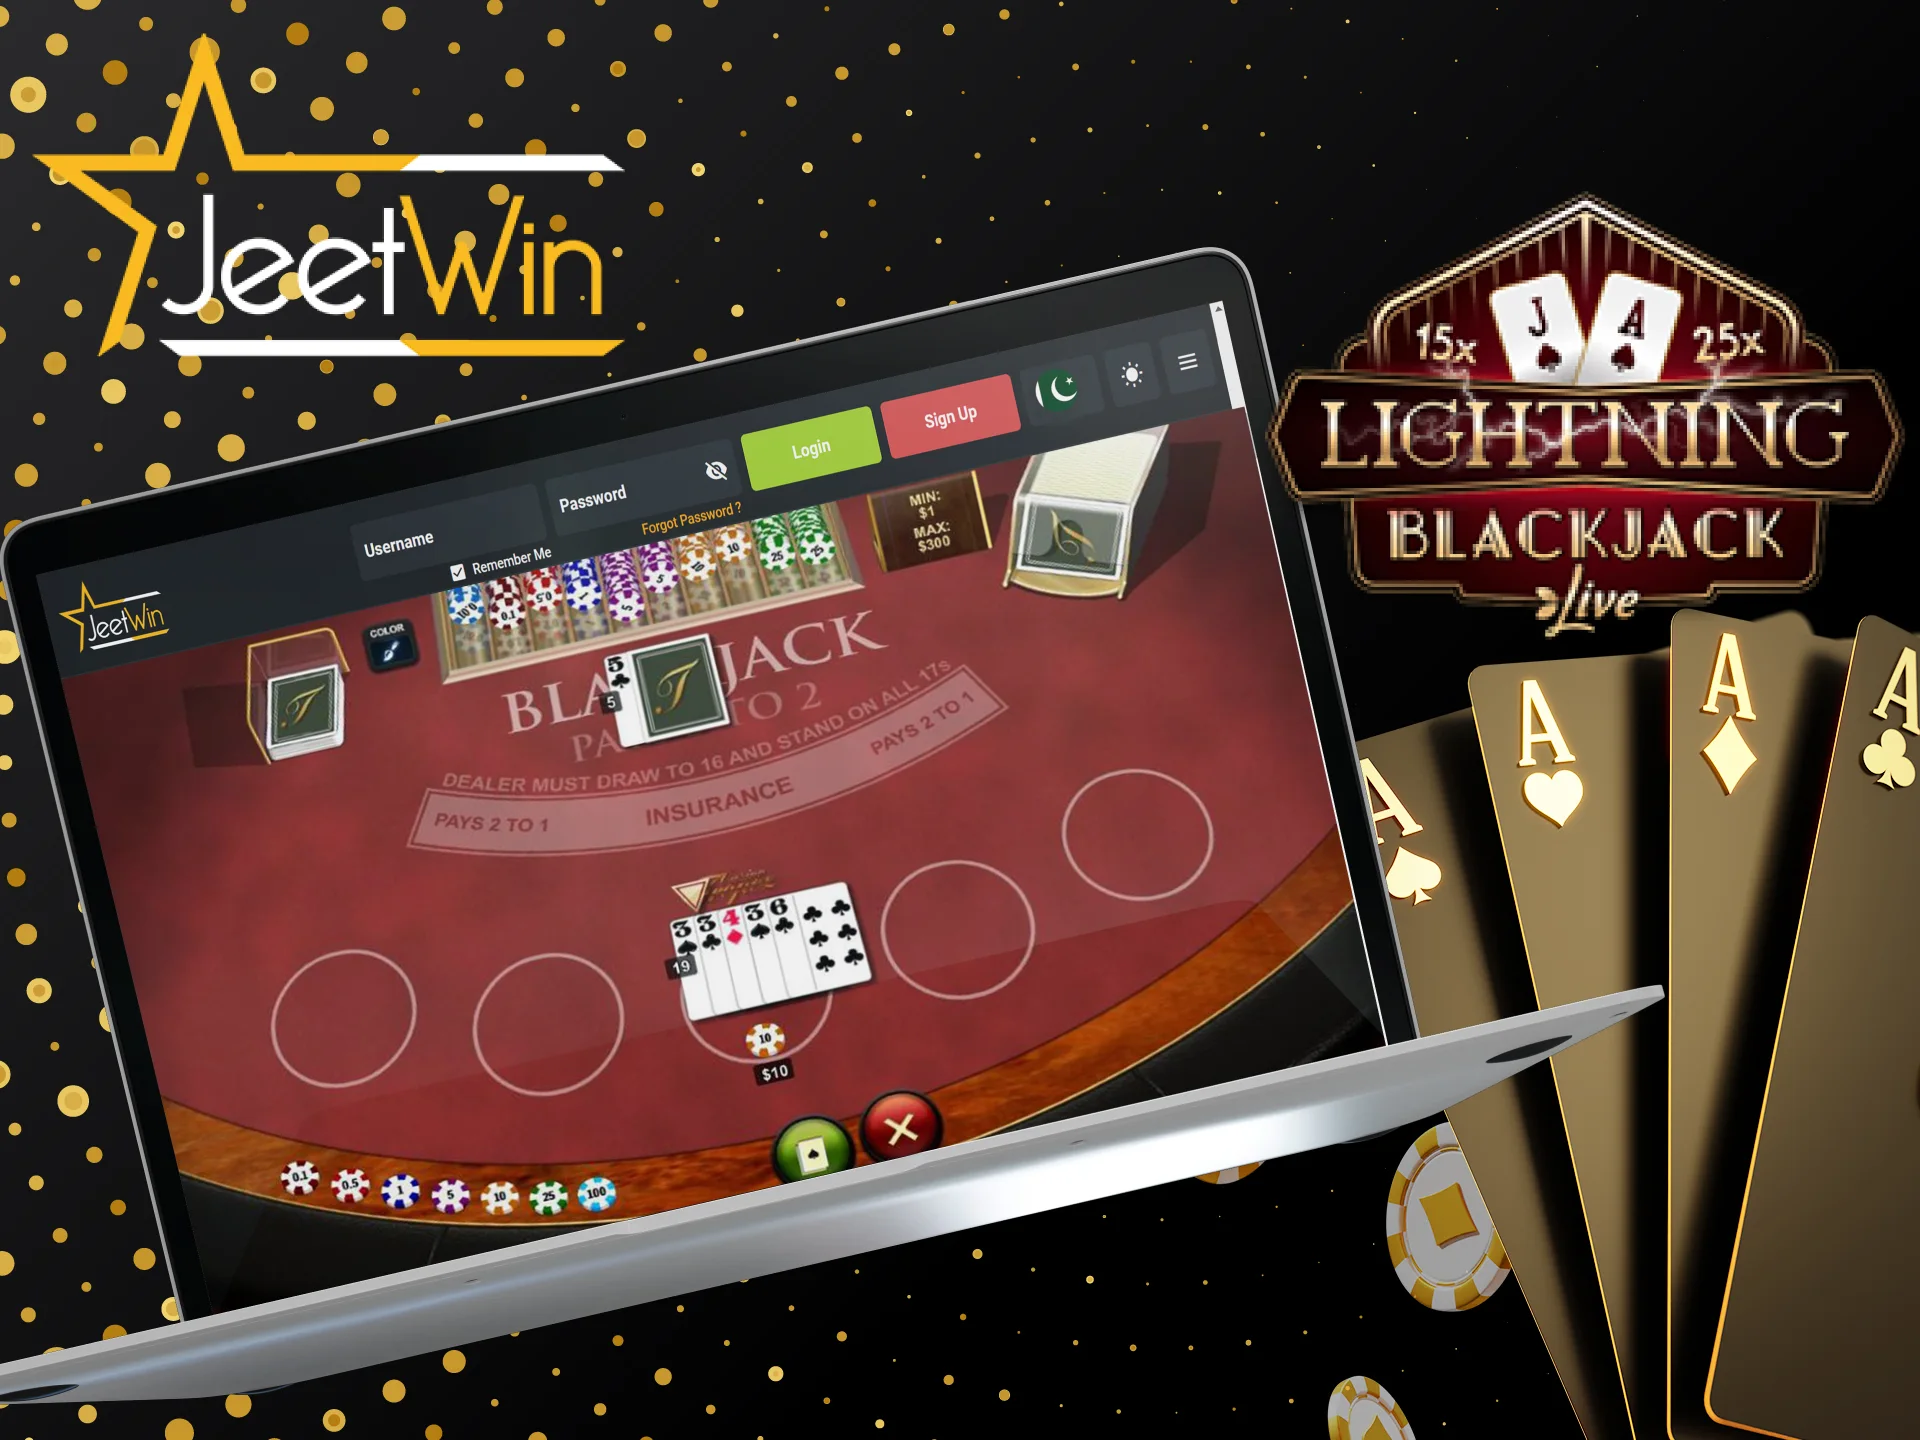 Become part of the JeetWin world and get big payouts with Lightning Blackjack.